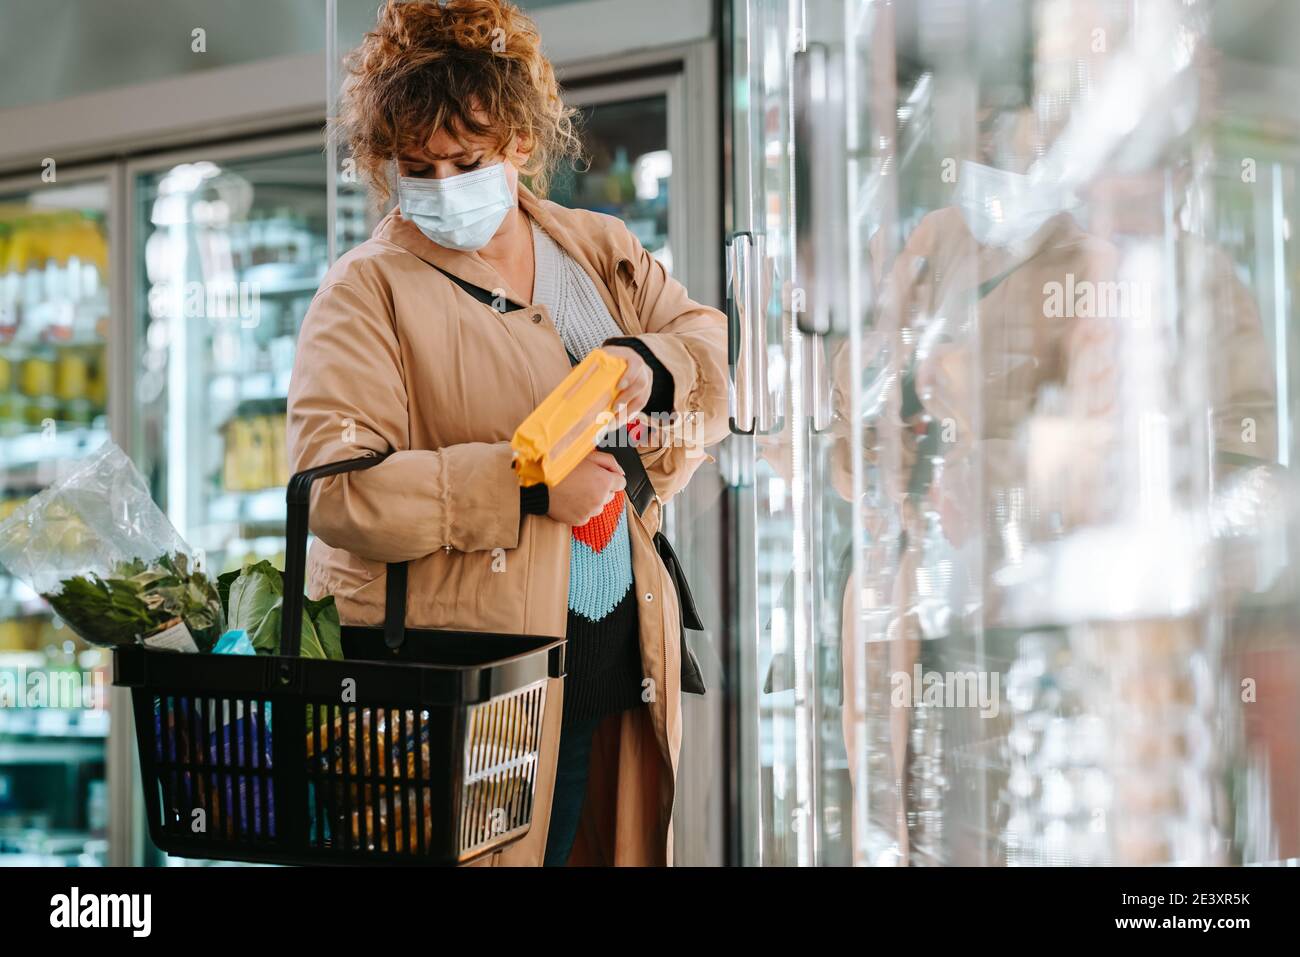 Woman with facemask buying food products at supermarket. Female customer wearing protective facemask shopping at grocery store. Stock Photo